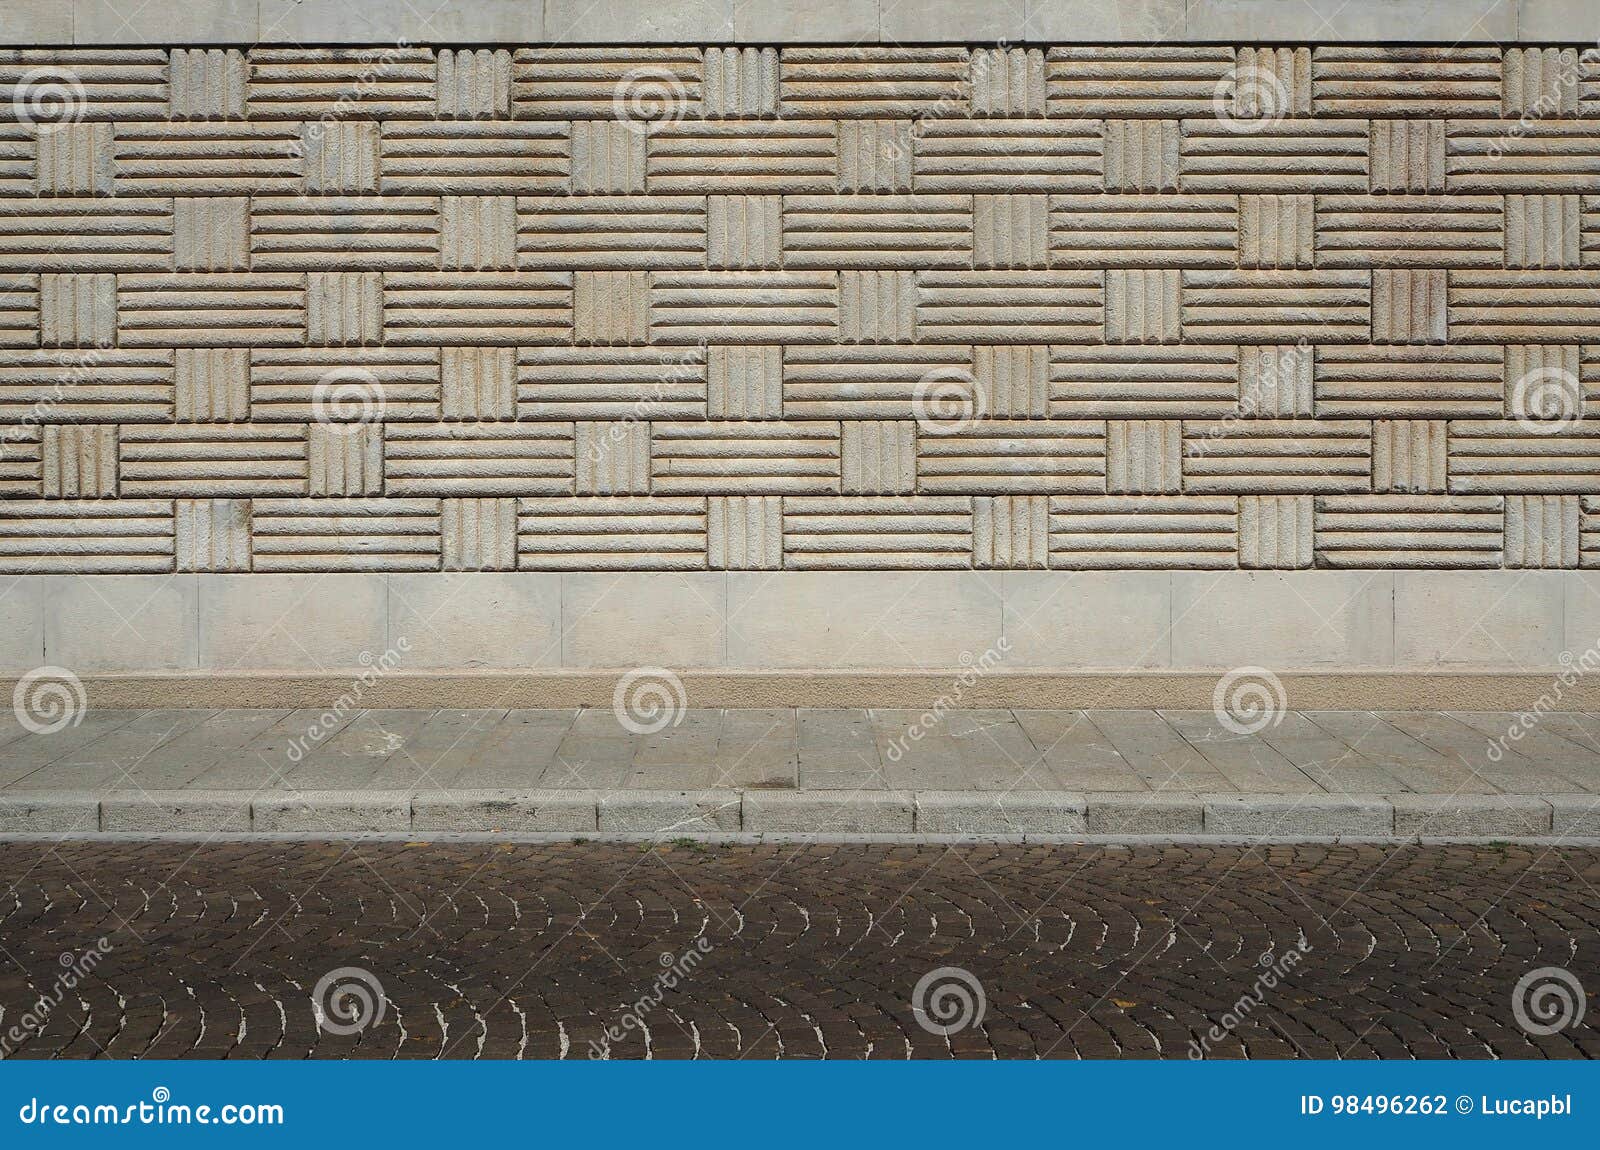 urban background. wall with geometric patterns, sidewalk and street with porphyry cubes